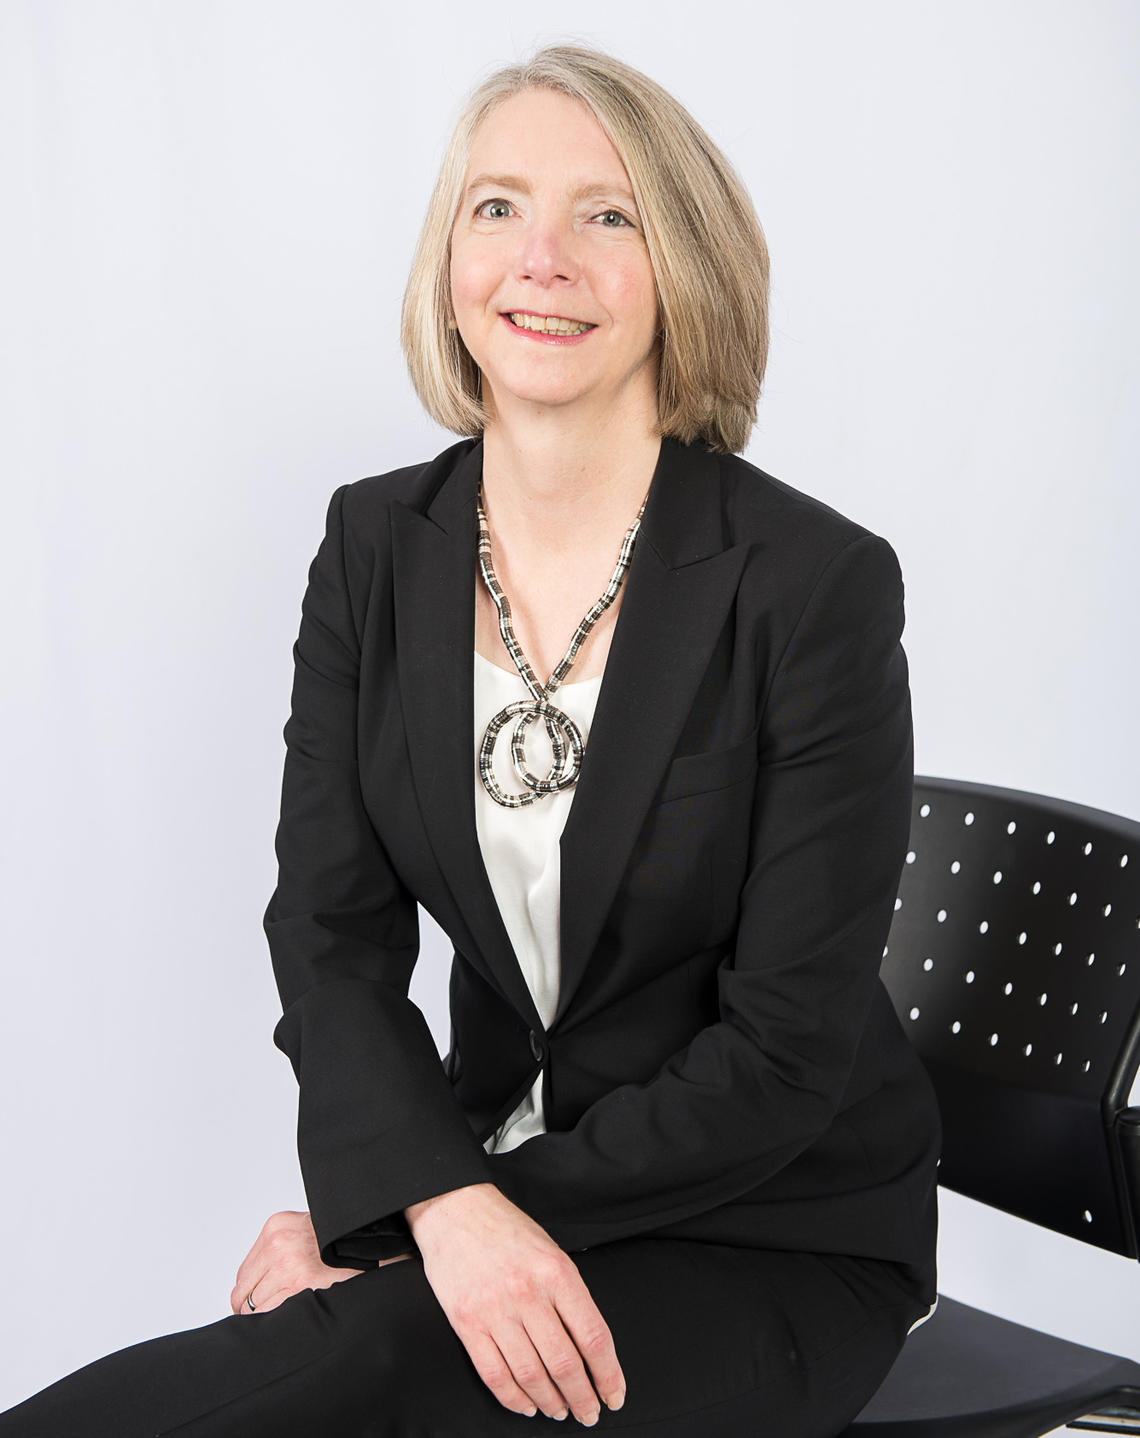 Cheryl Dueck has been appointed senior academic director (international) of the University of Calgary International for a five-year term, effective Oct. 1, 2018.